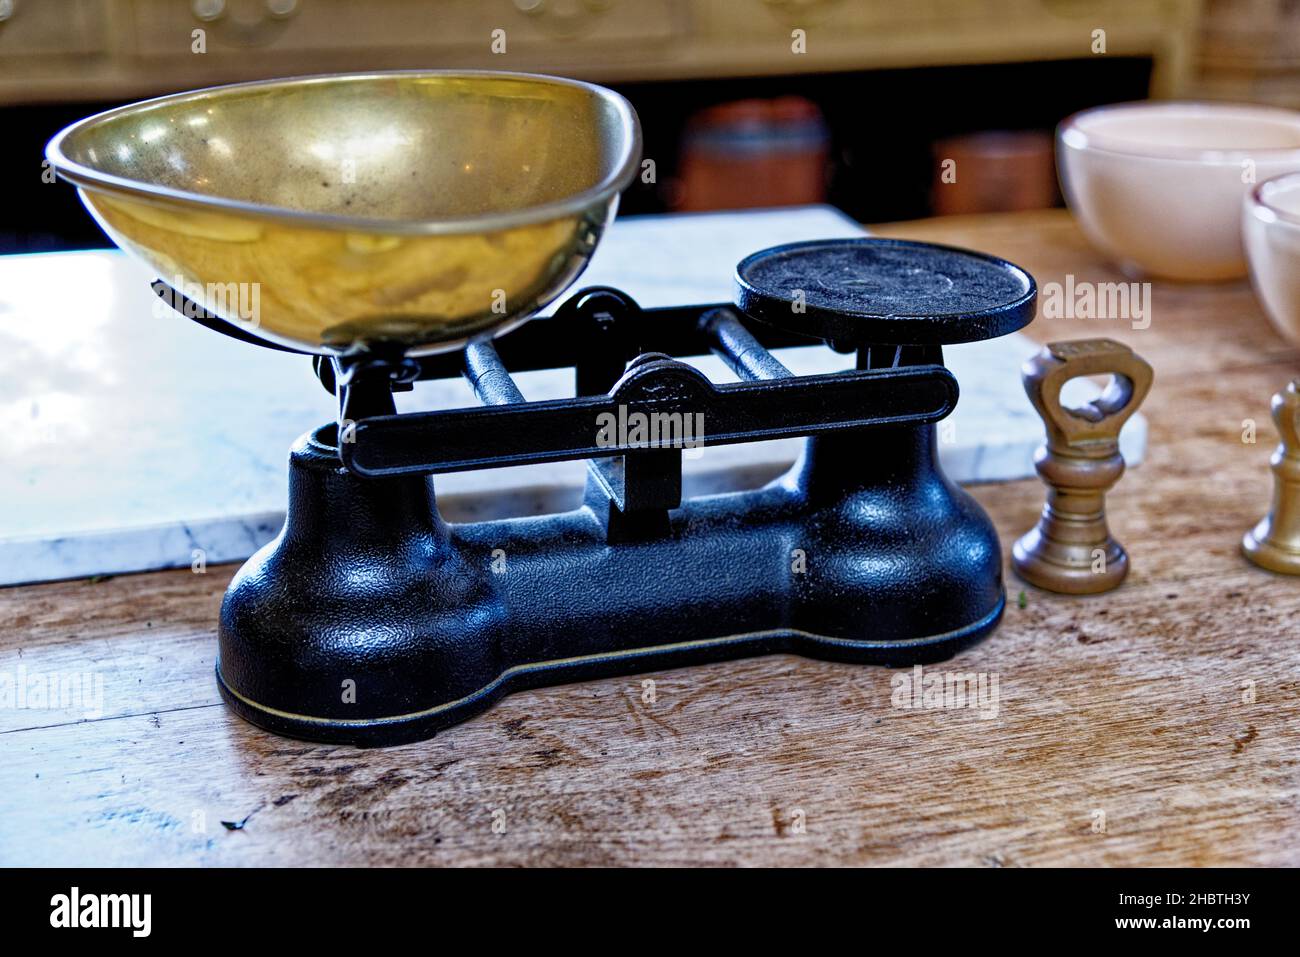 https://c8.alamy.com/comp/2HBTH3Y/antique-vintage-old-weight-scale-in-the-kitchen-of-culzean-castle-maybole-in-ayrshire-scotland-united-kingdom-22nd-of-july-2021-2HBTH3Y.jpg